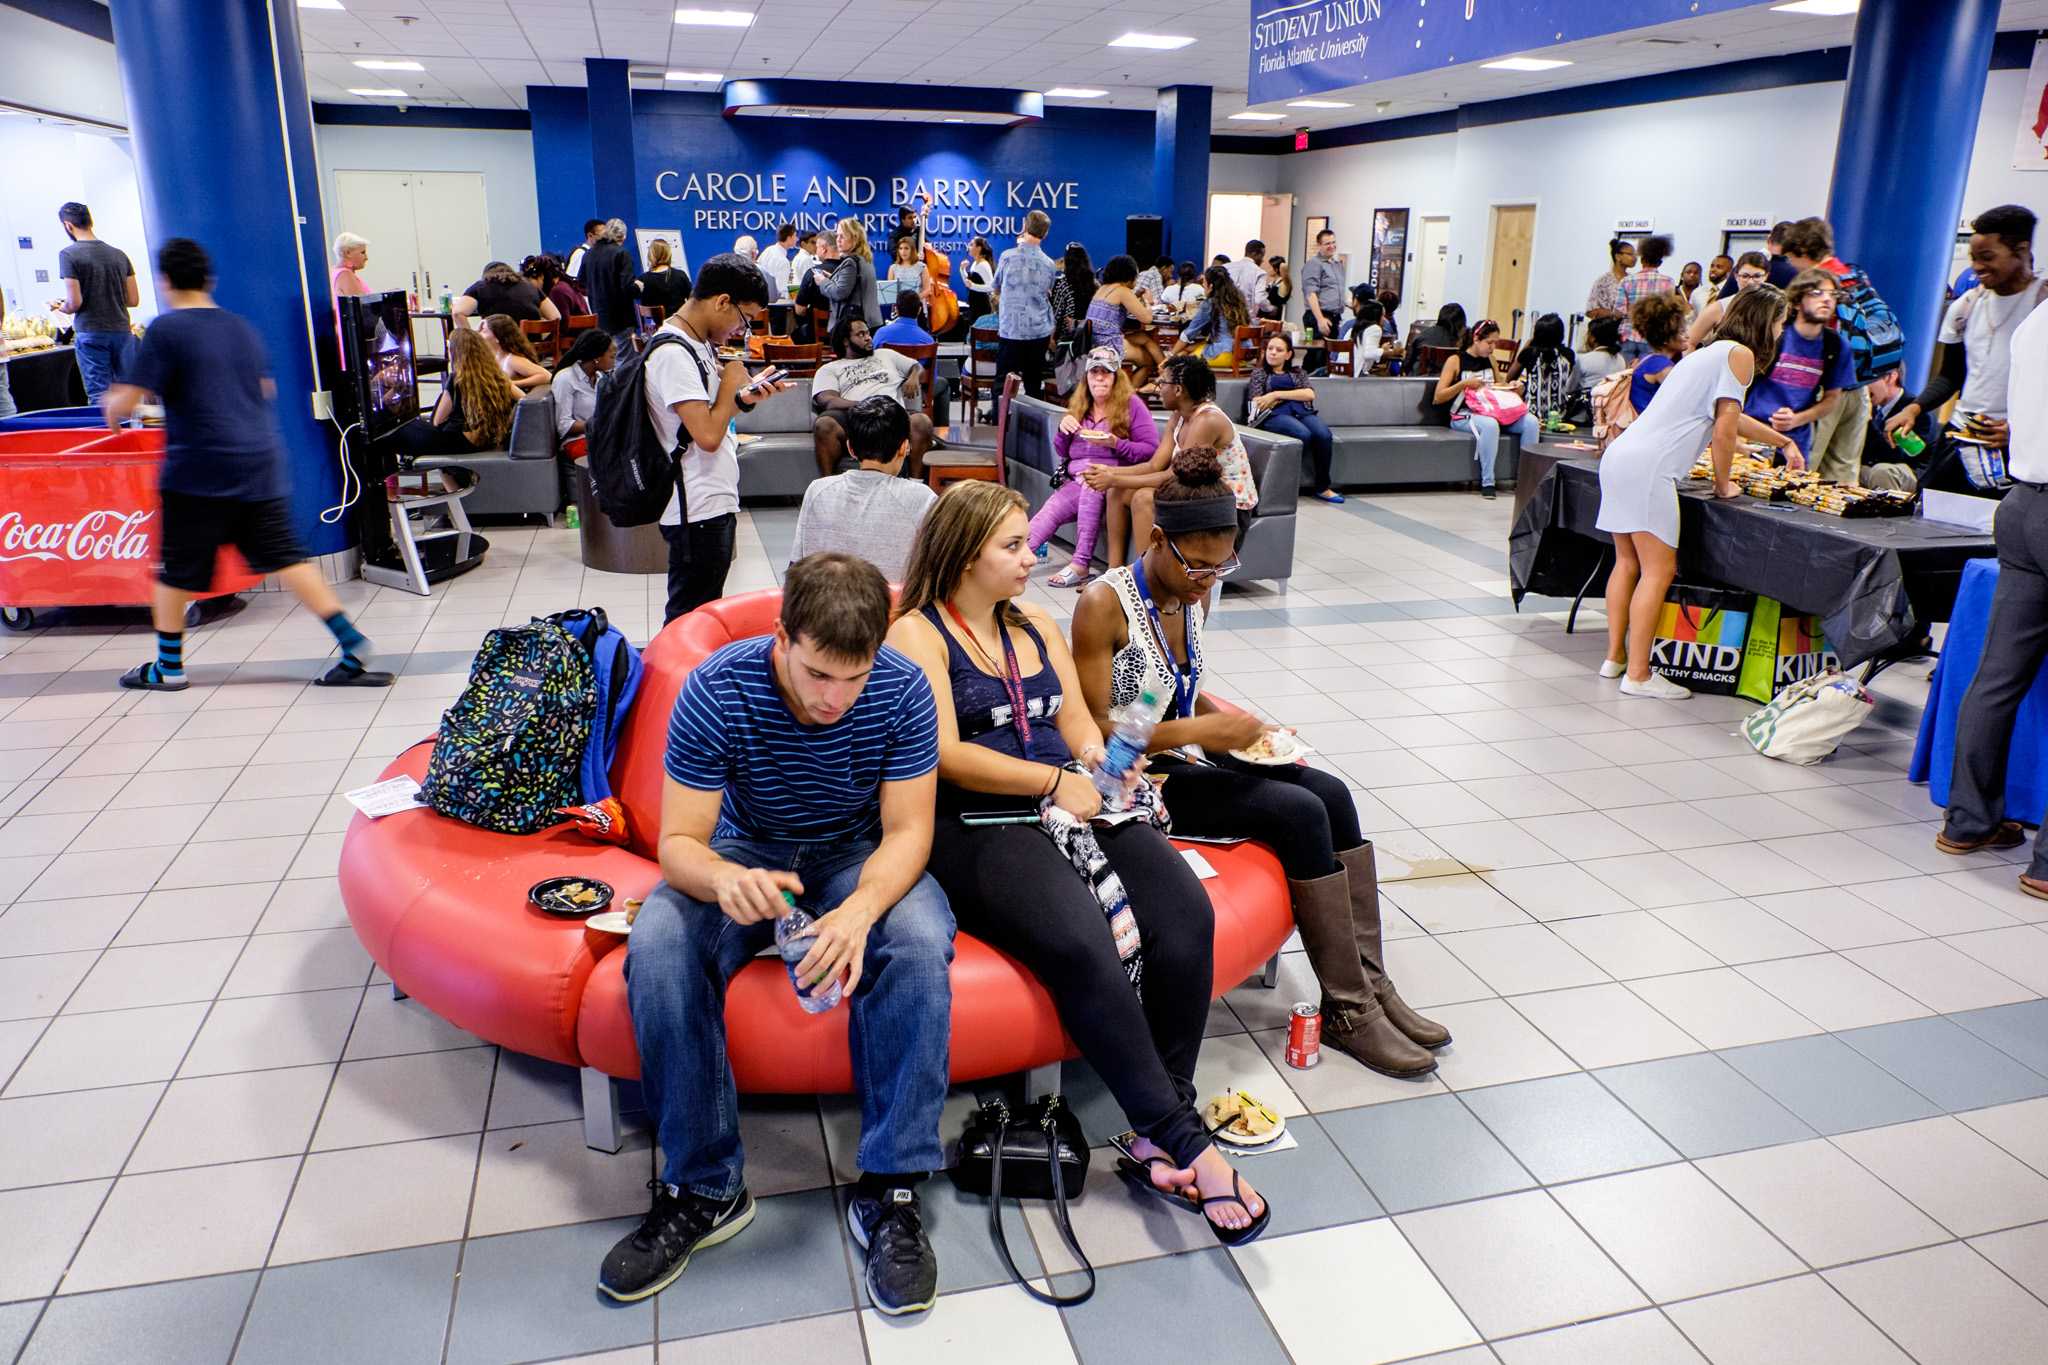 FAU ranked 20th in “most phenomenal” student unions nationally